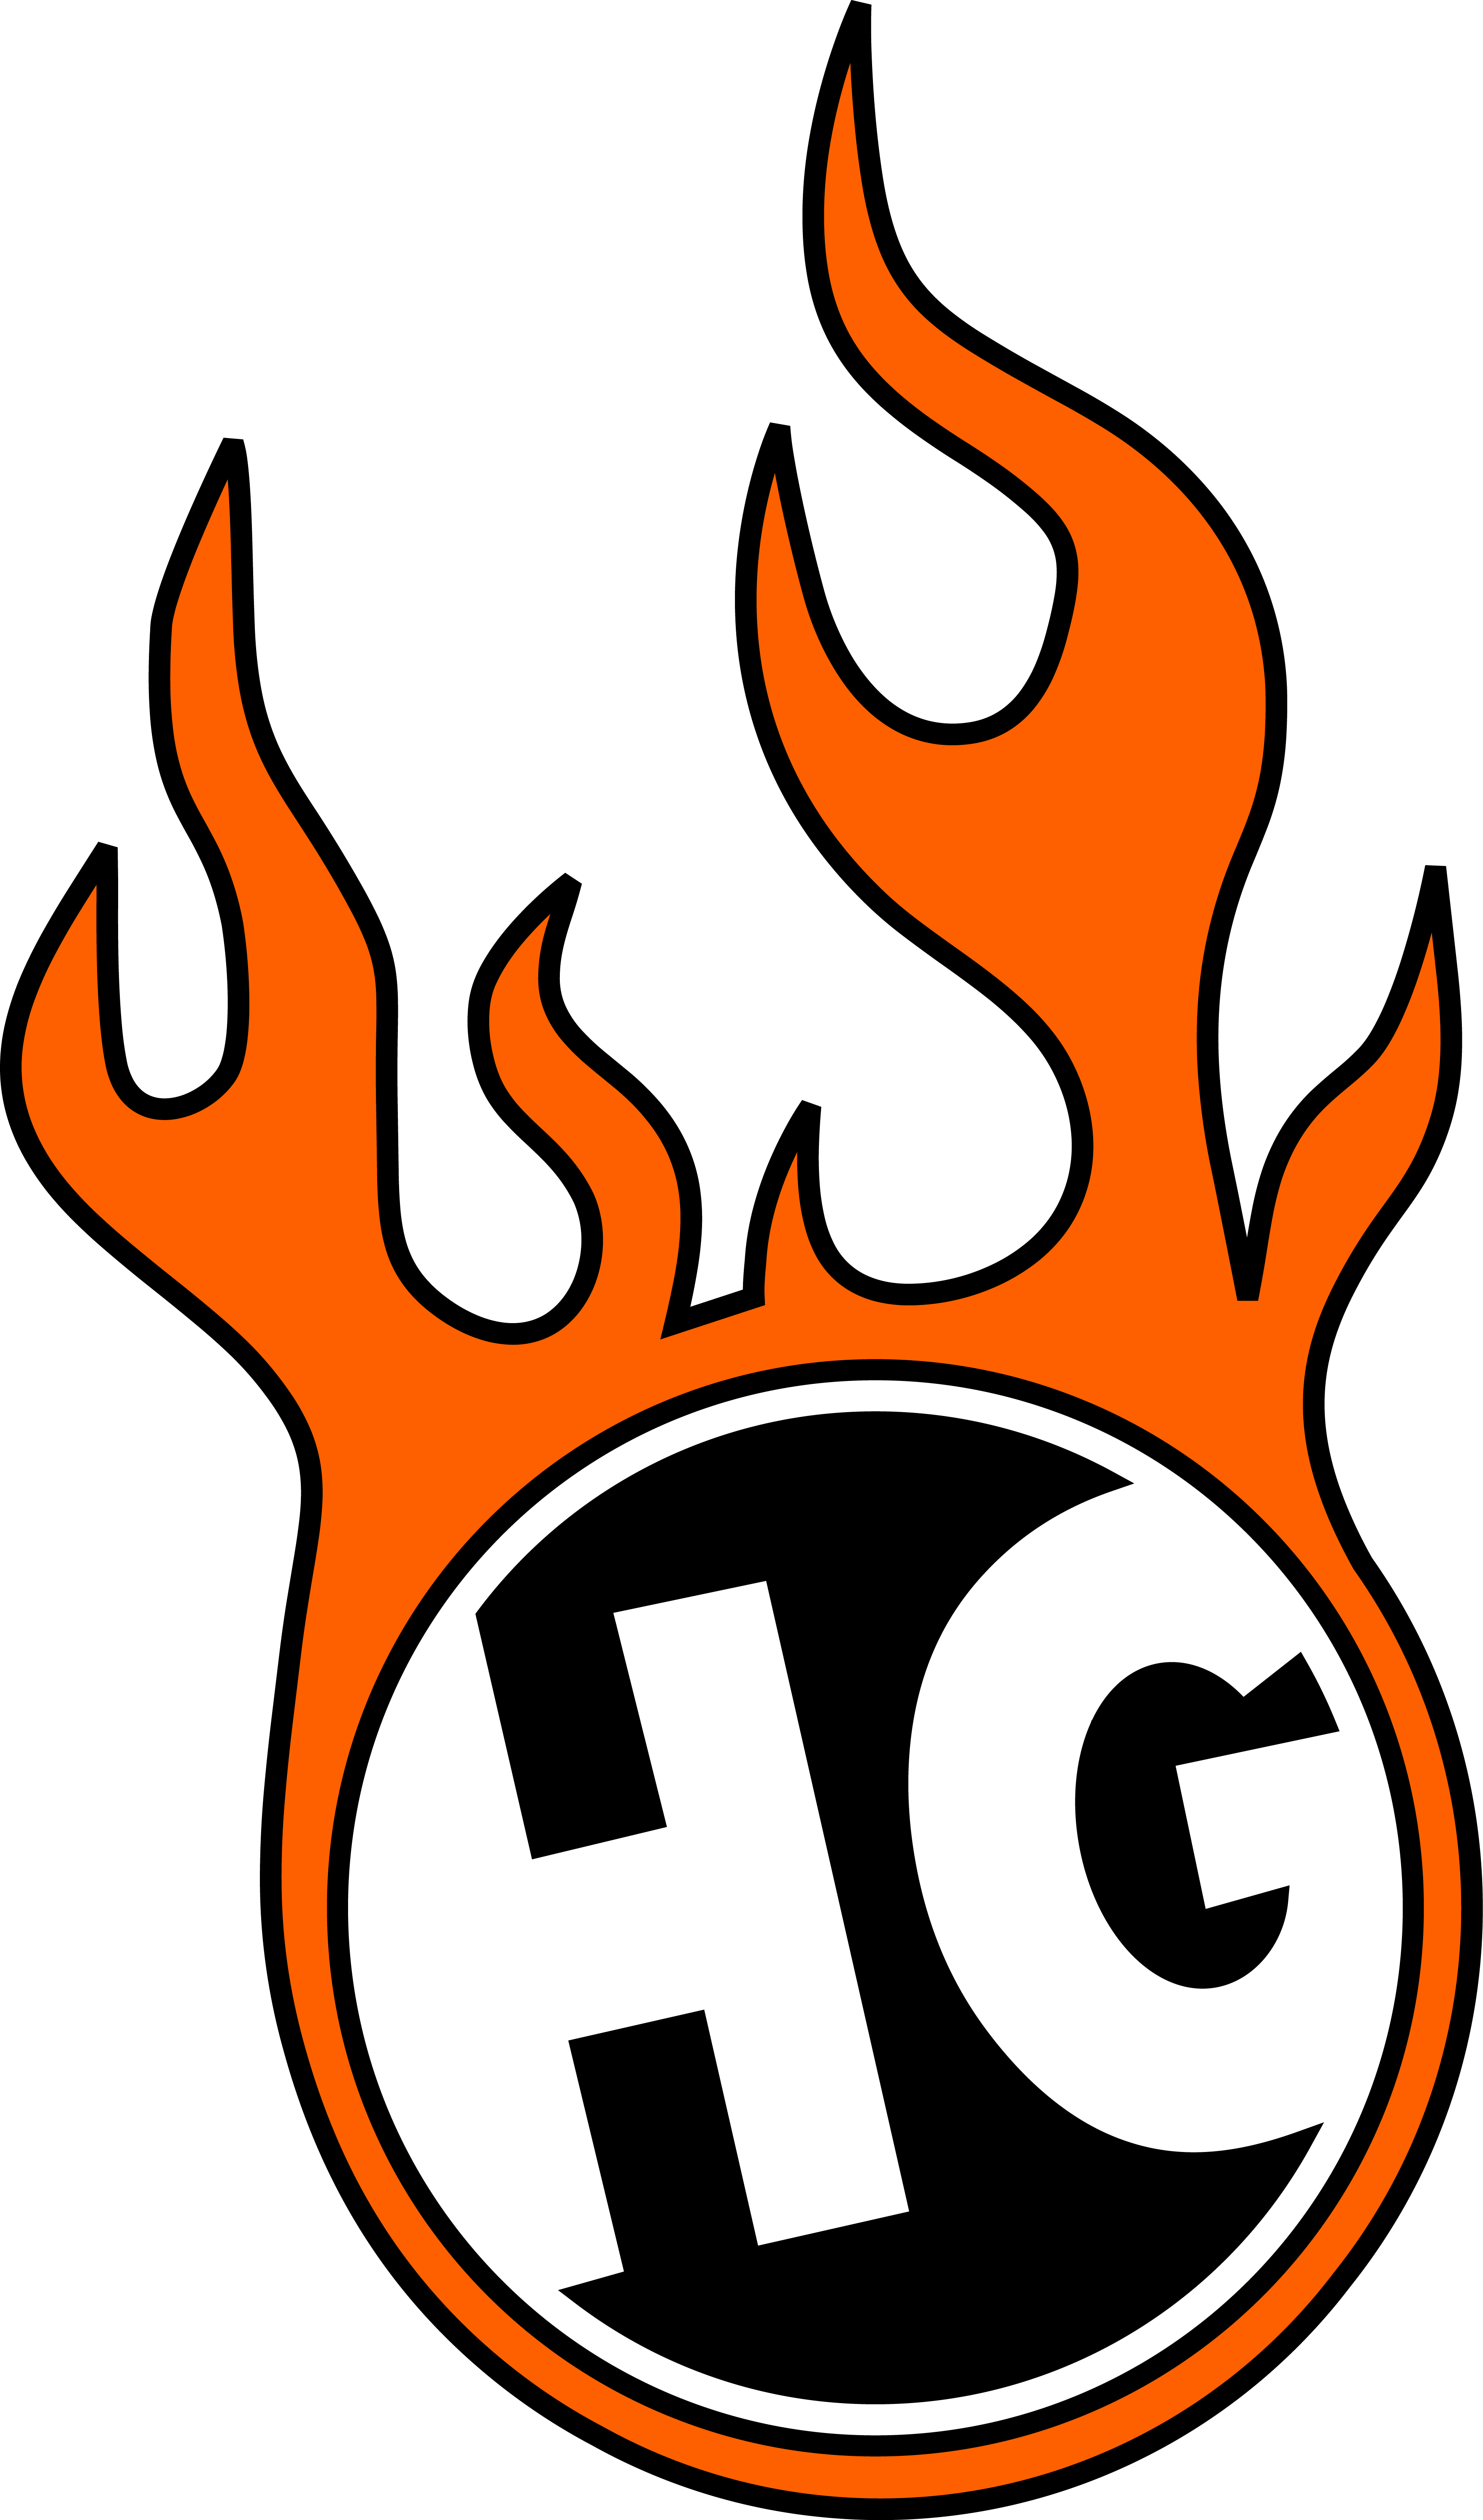 A black and orange logo with the word hg on it.